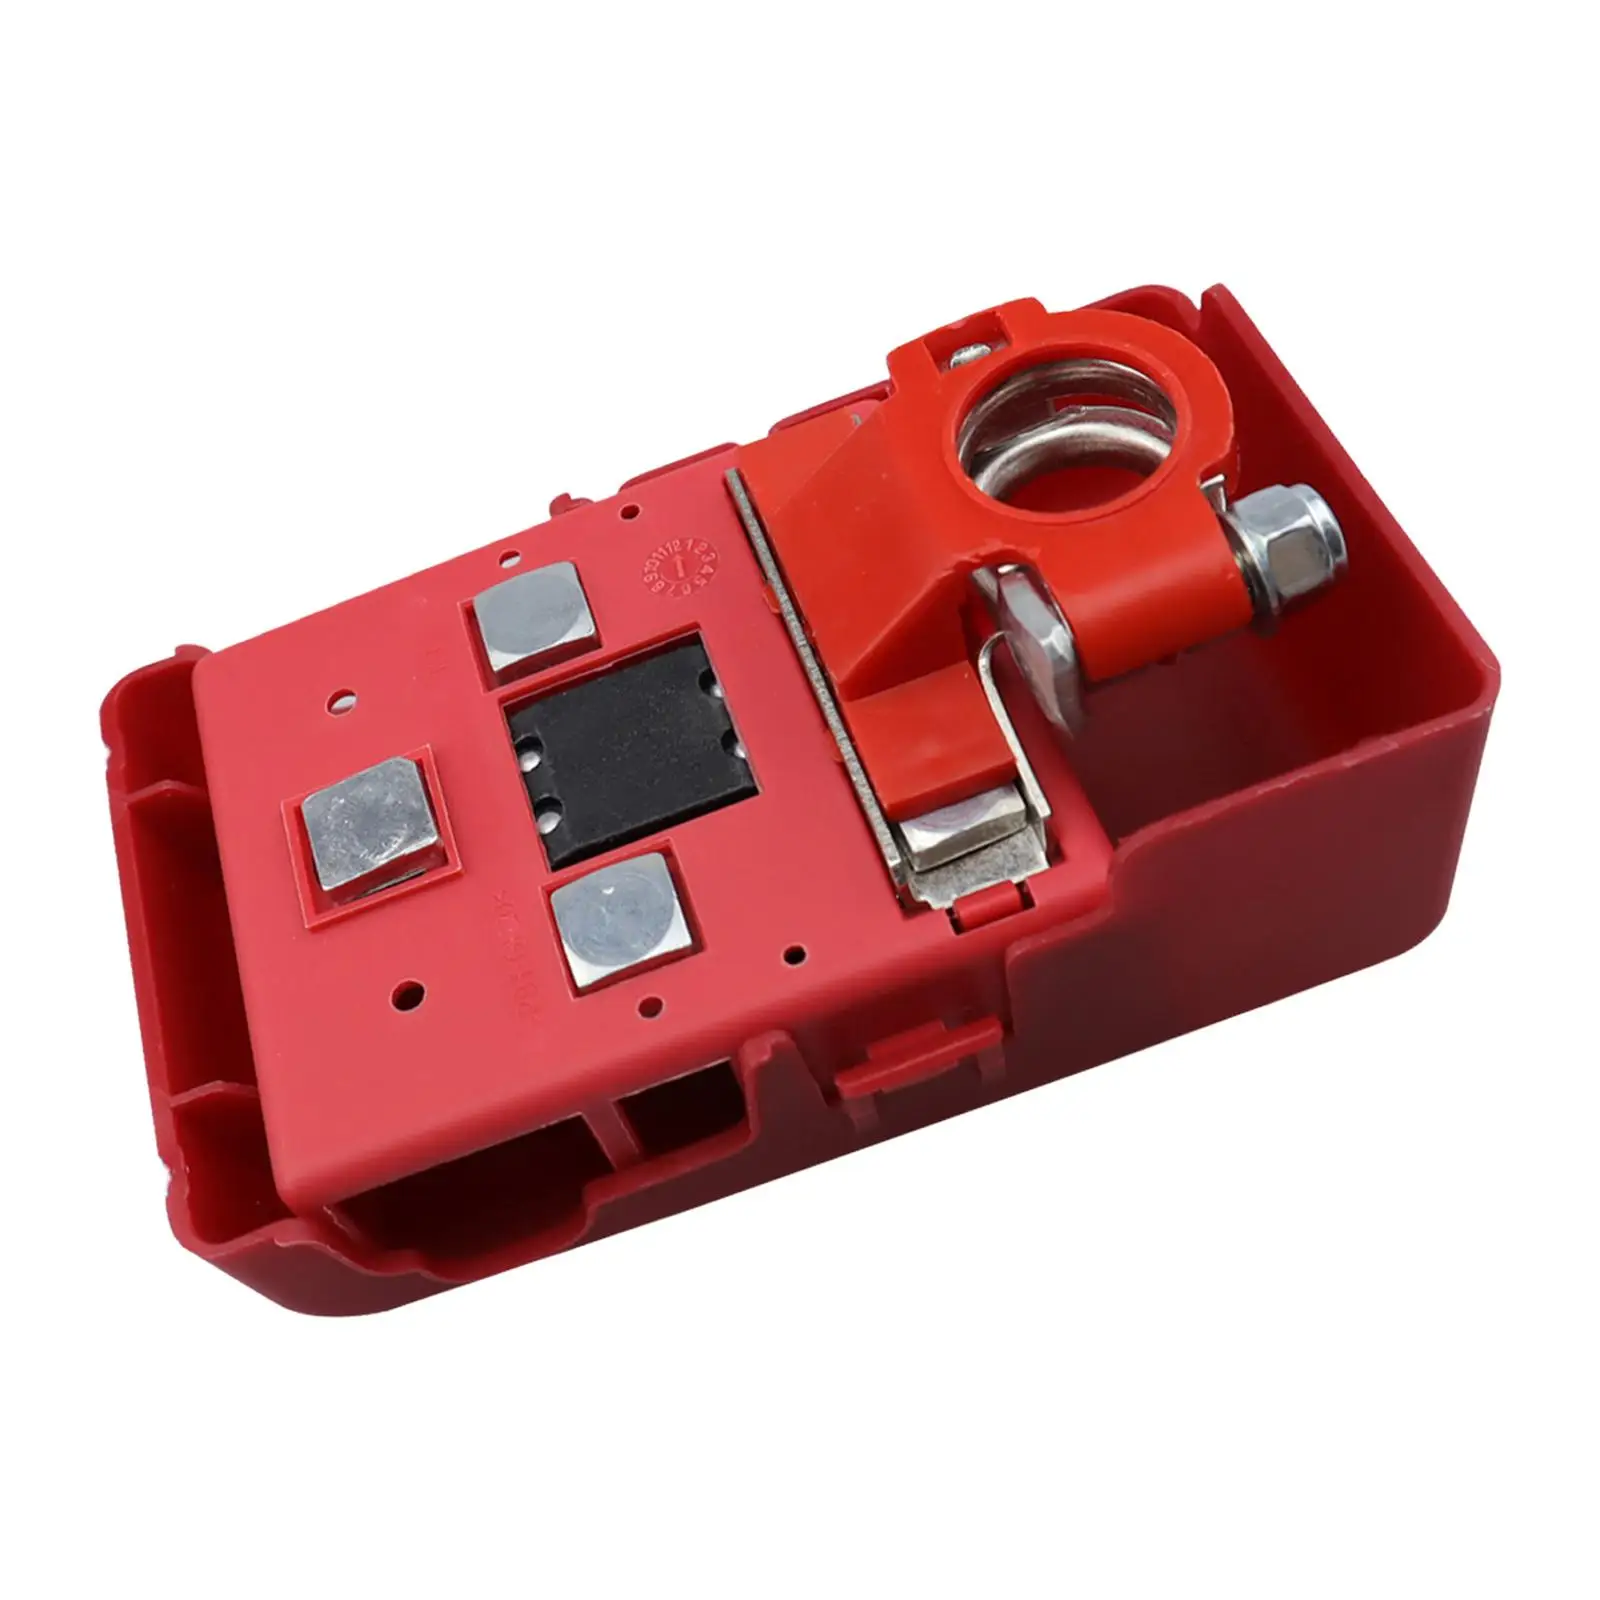 Car Battery Distribution Terminal Fuse Block Circuit Quick Release Fused Clamps Connector for 4wds Car Caravans Yachts